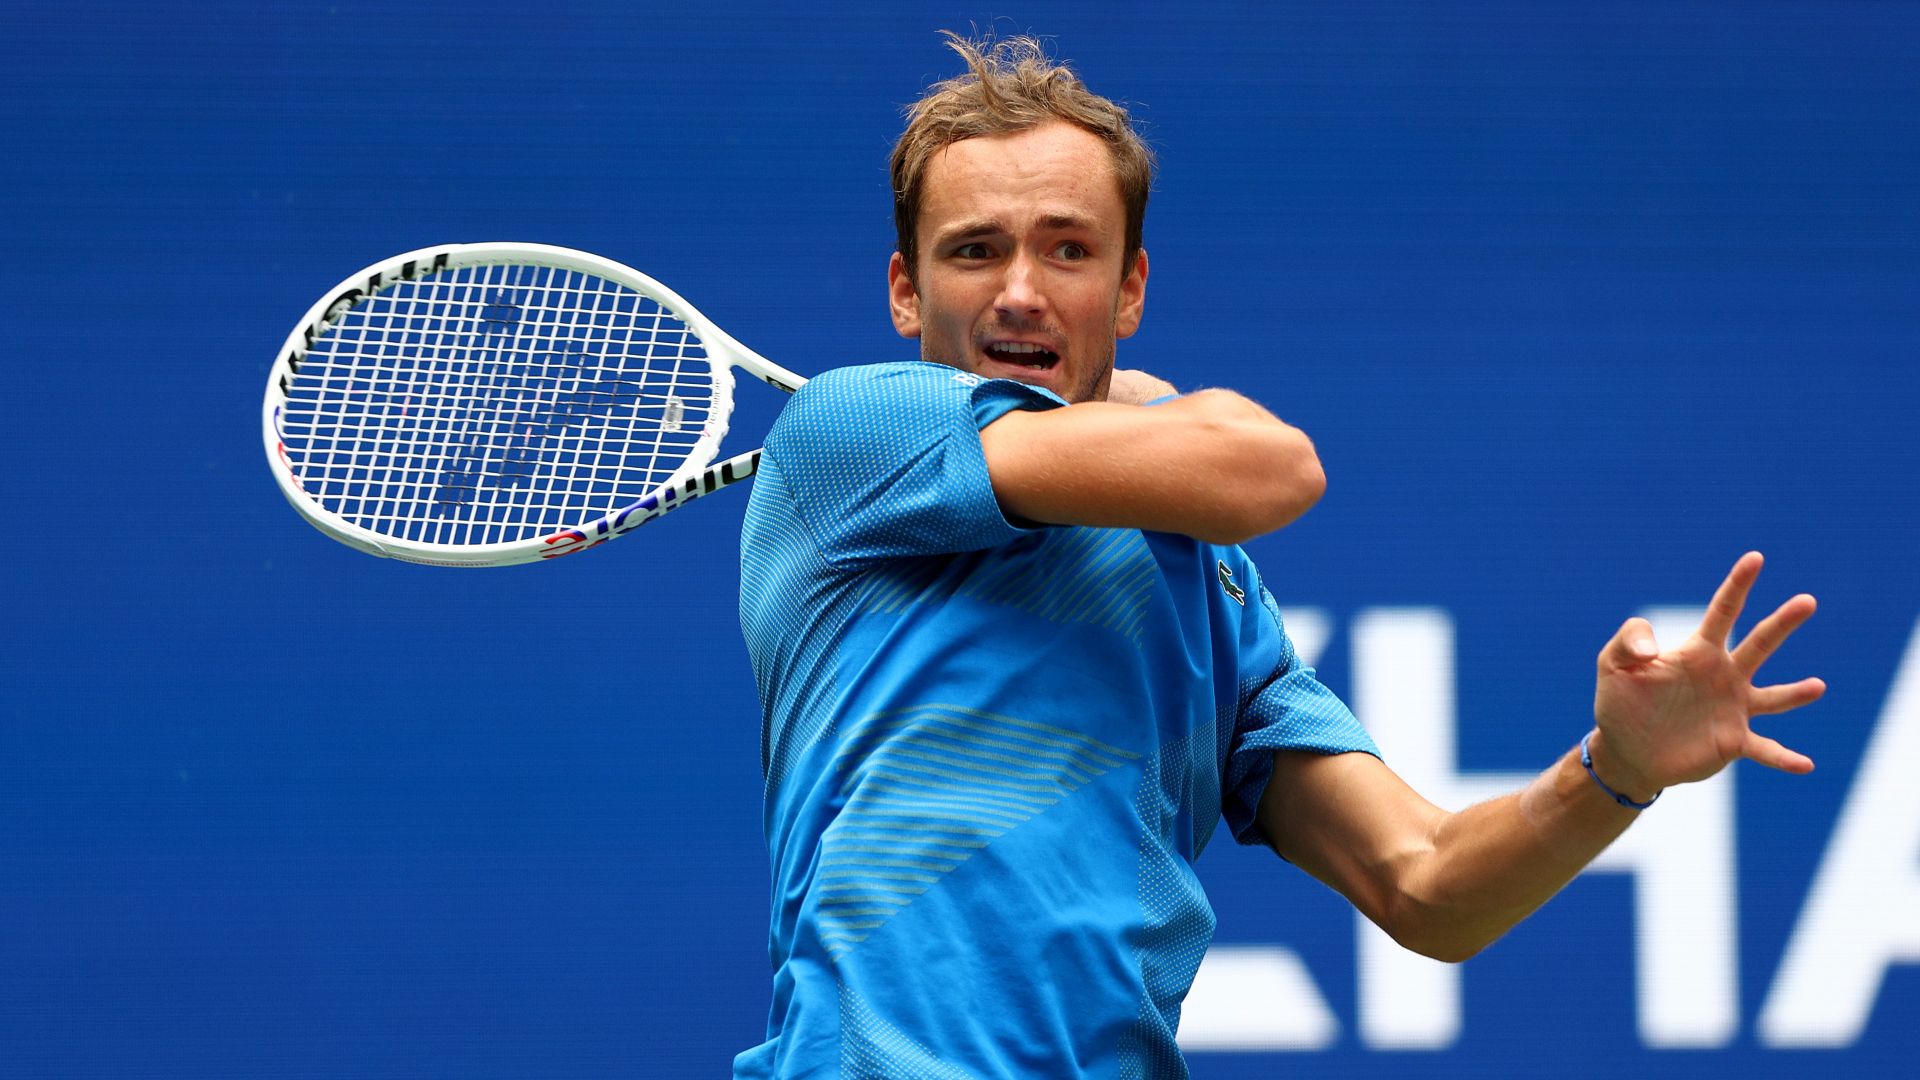 Medvedev, the US Open champion, remains unaffected by added pressure following first-round victory